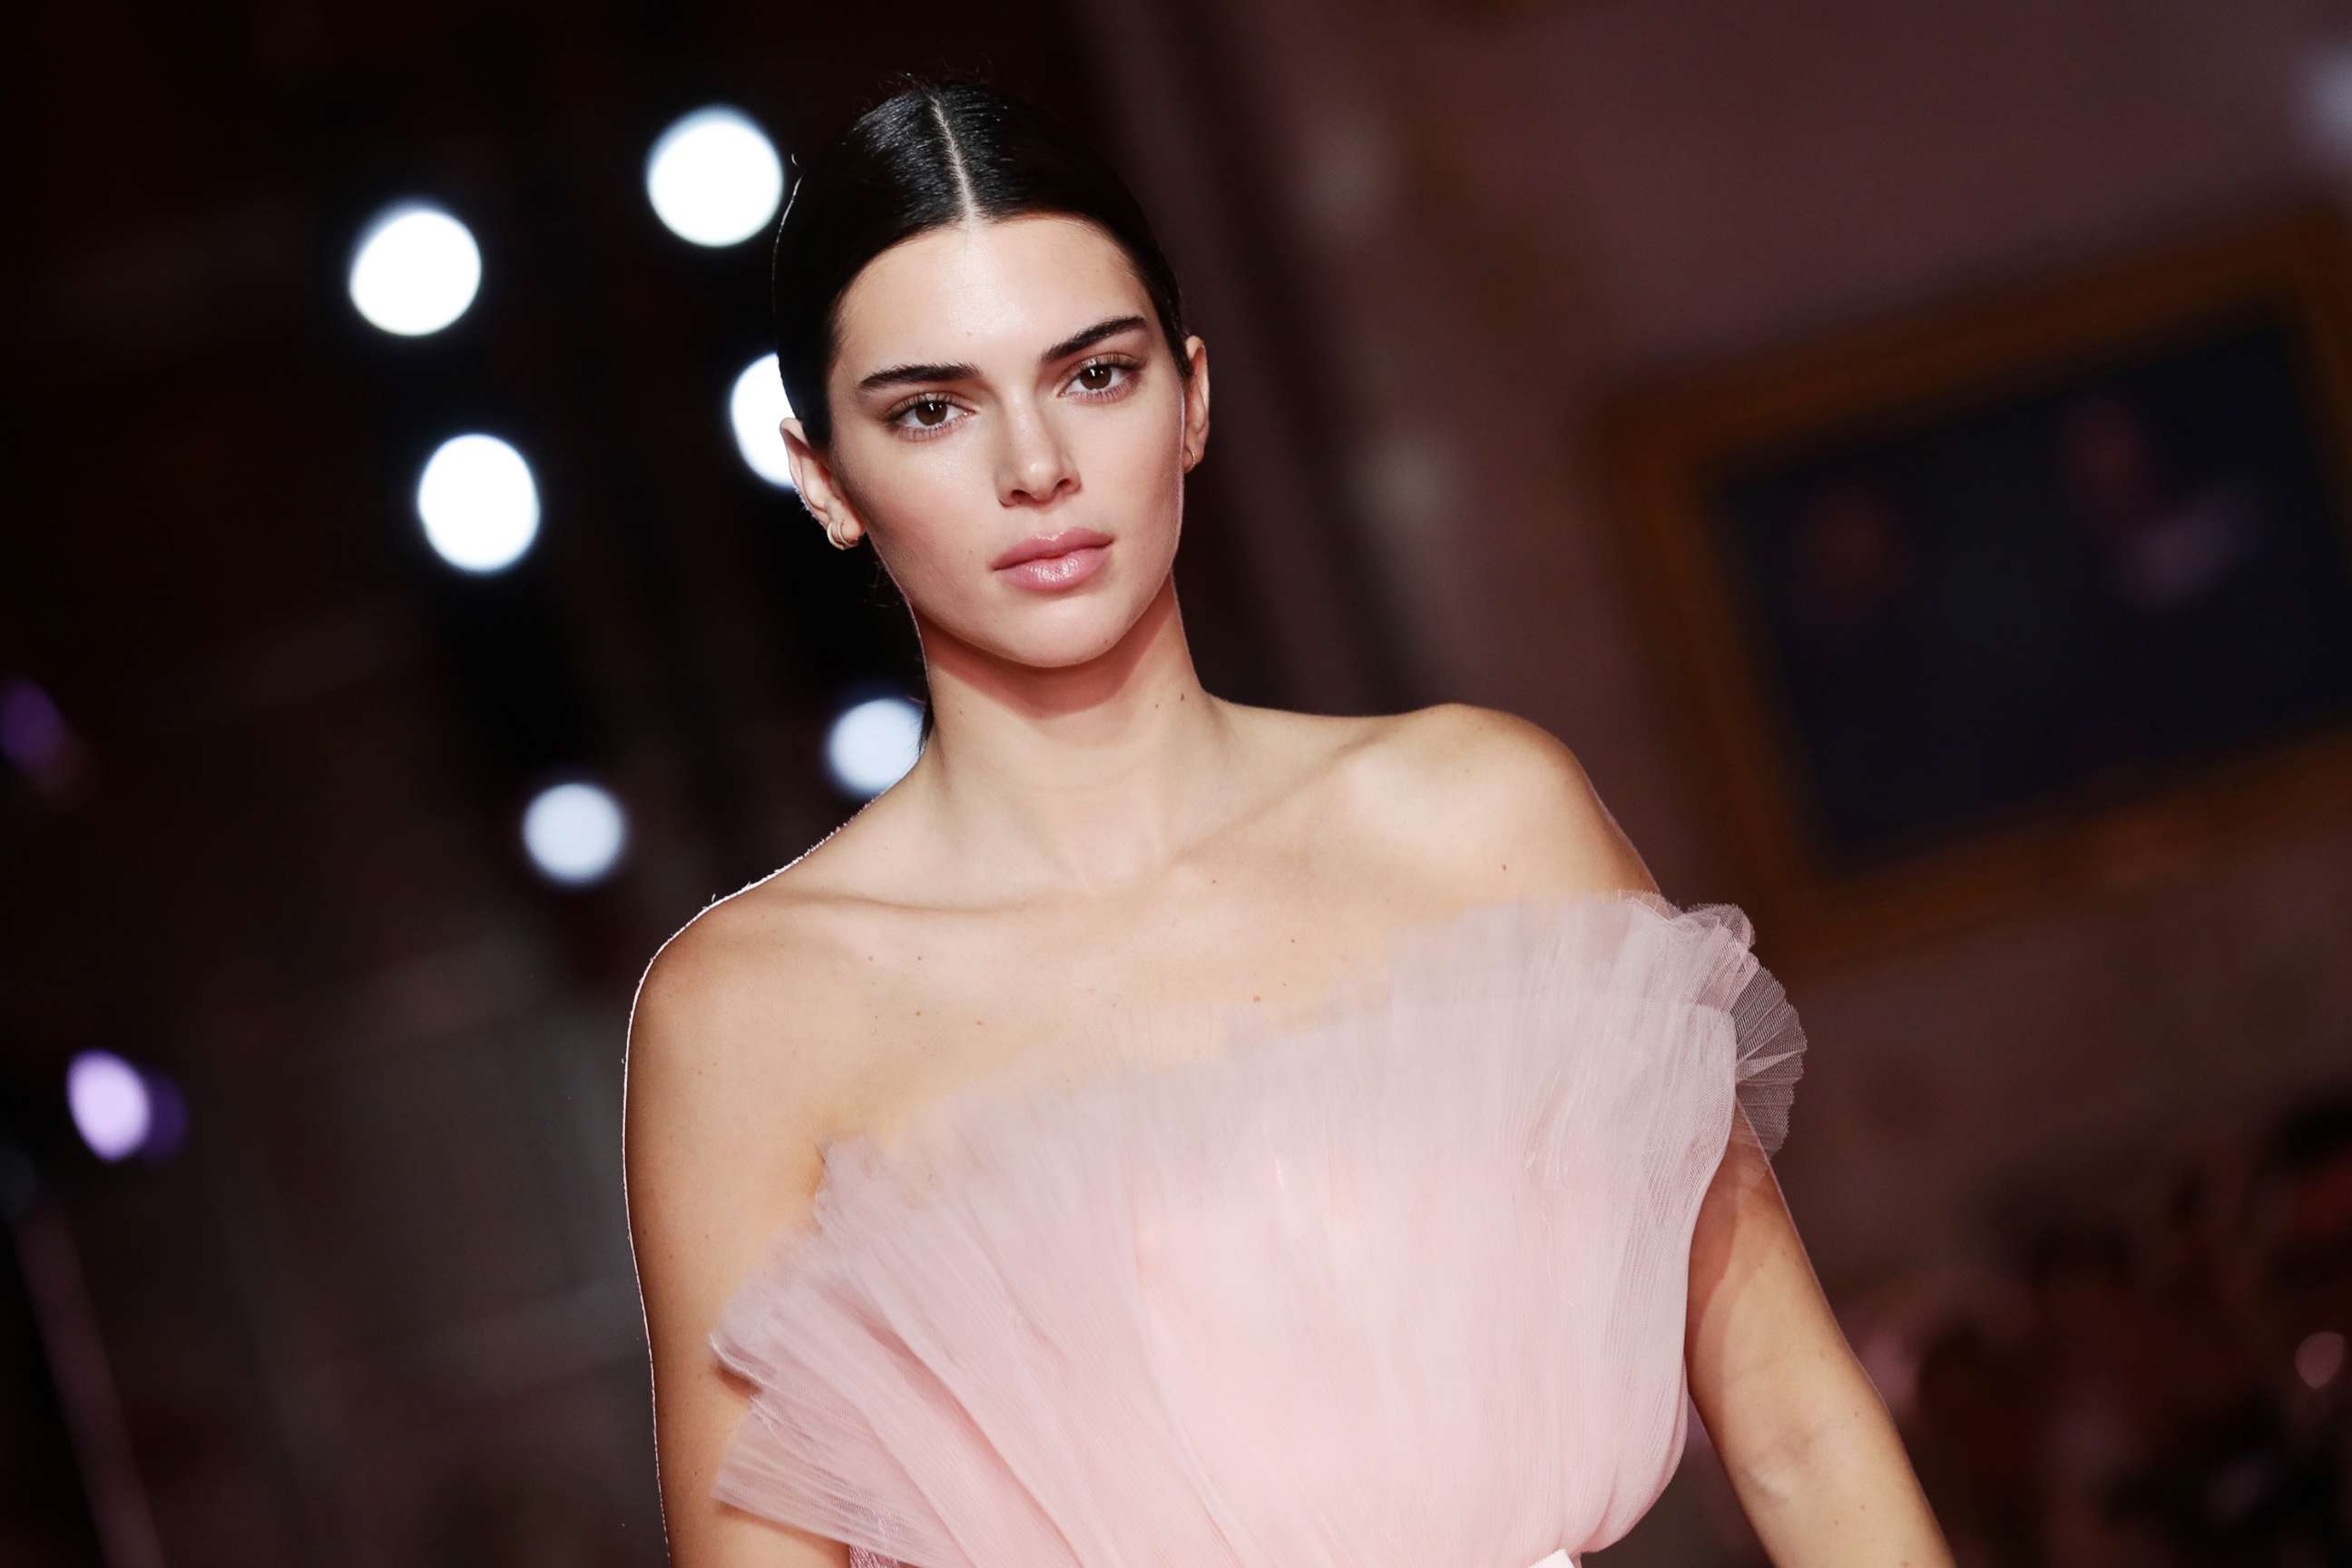 PHOTO: Kendall Jenner walks the runway during the Giambattista Valli Loves H&M show, Oct. 24, 2019 in Rome.